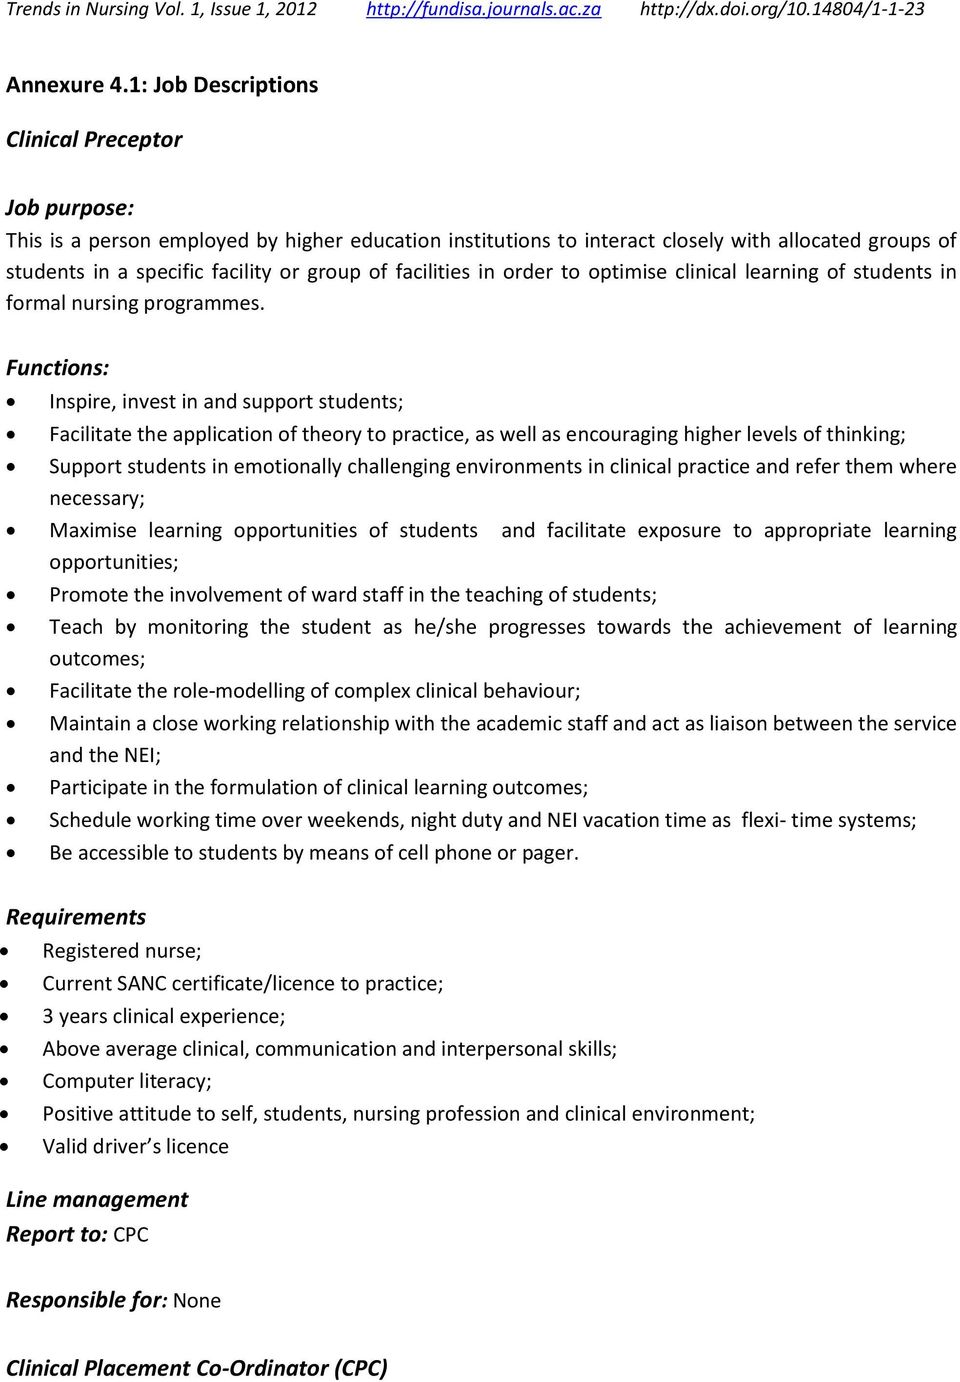 facilities in order to optimise clinical learning of students in formal nursing programmes.